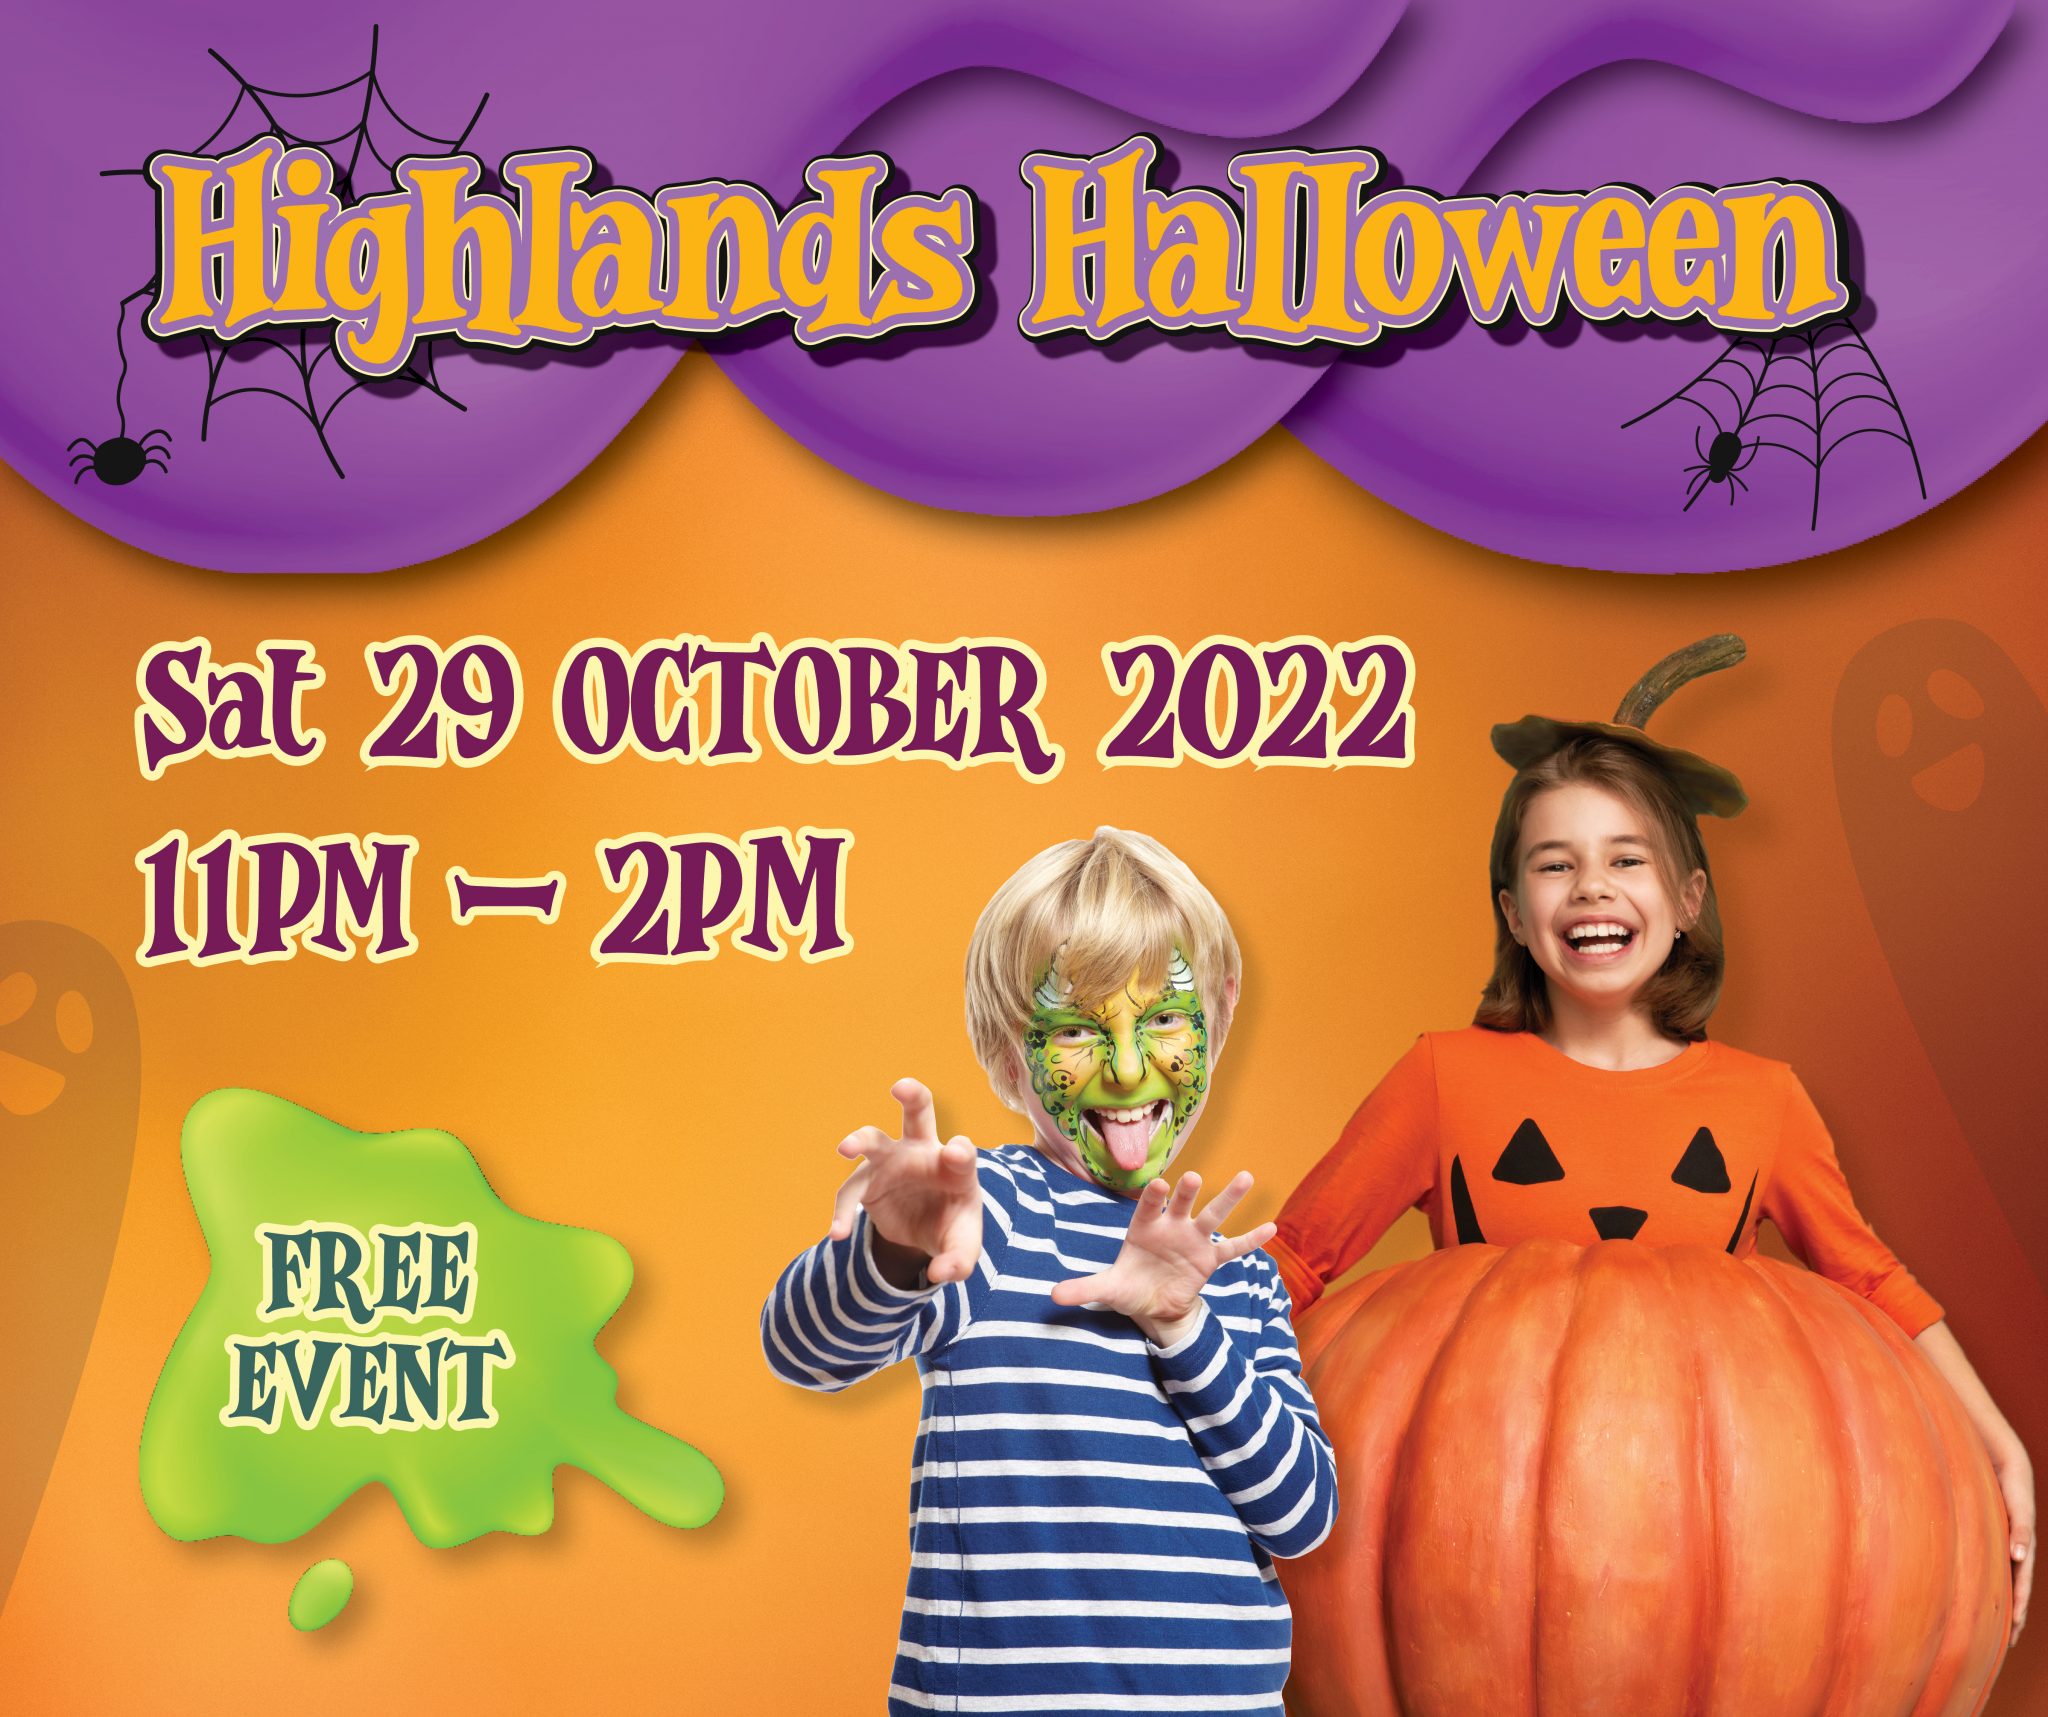 Celebrate Halloween with Highlands! Highlands Shopping Centre